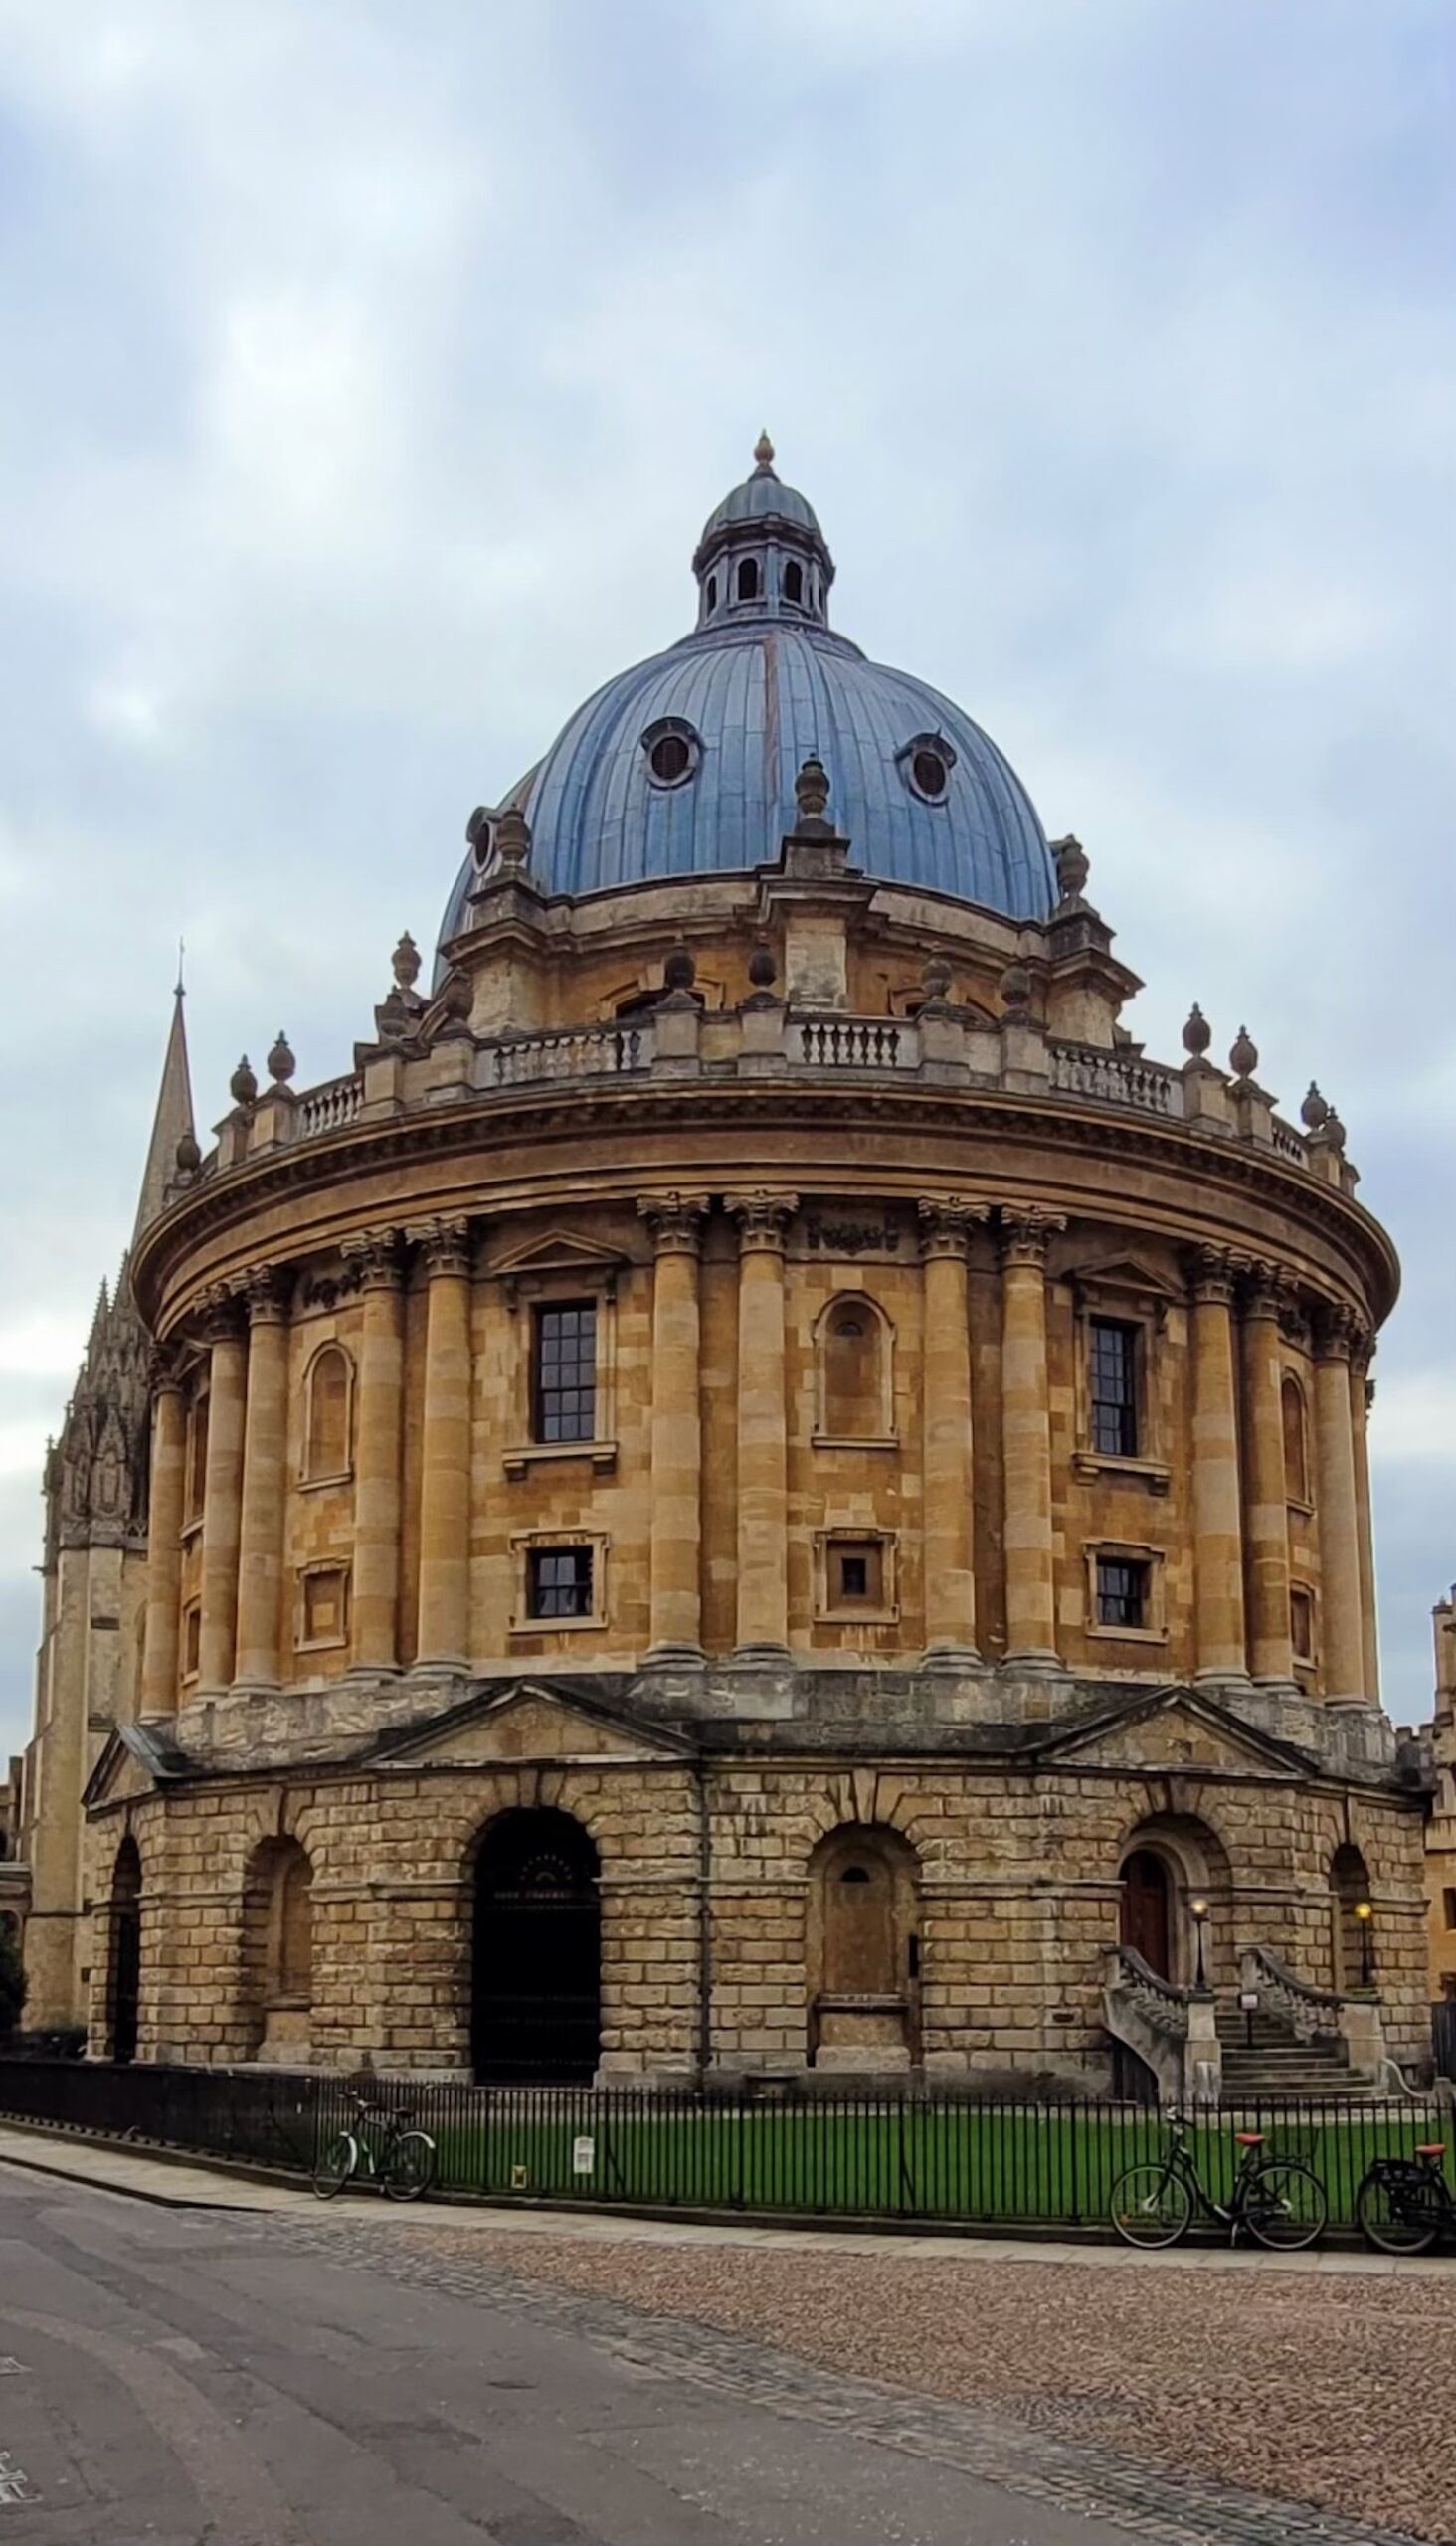 Things to do in Oxford, England: The Radcliffe Camera